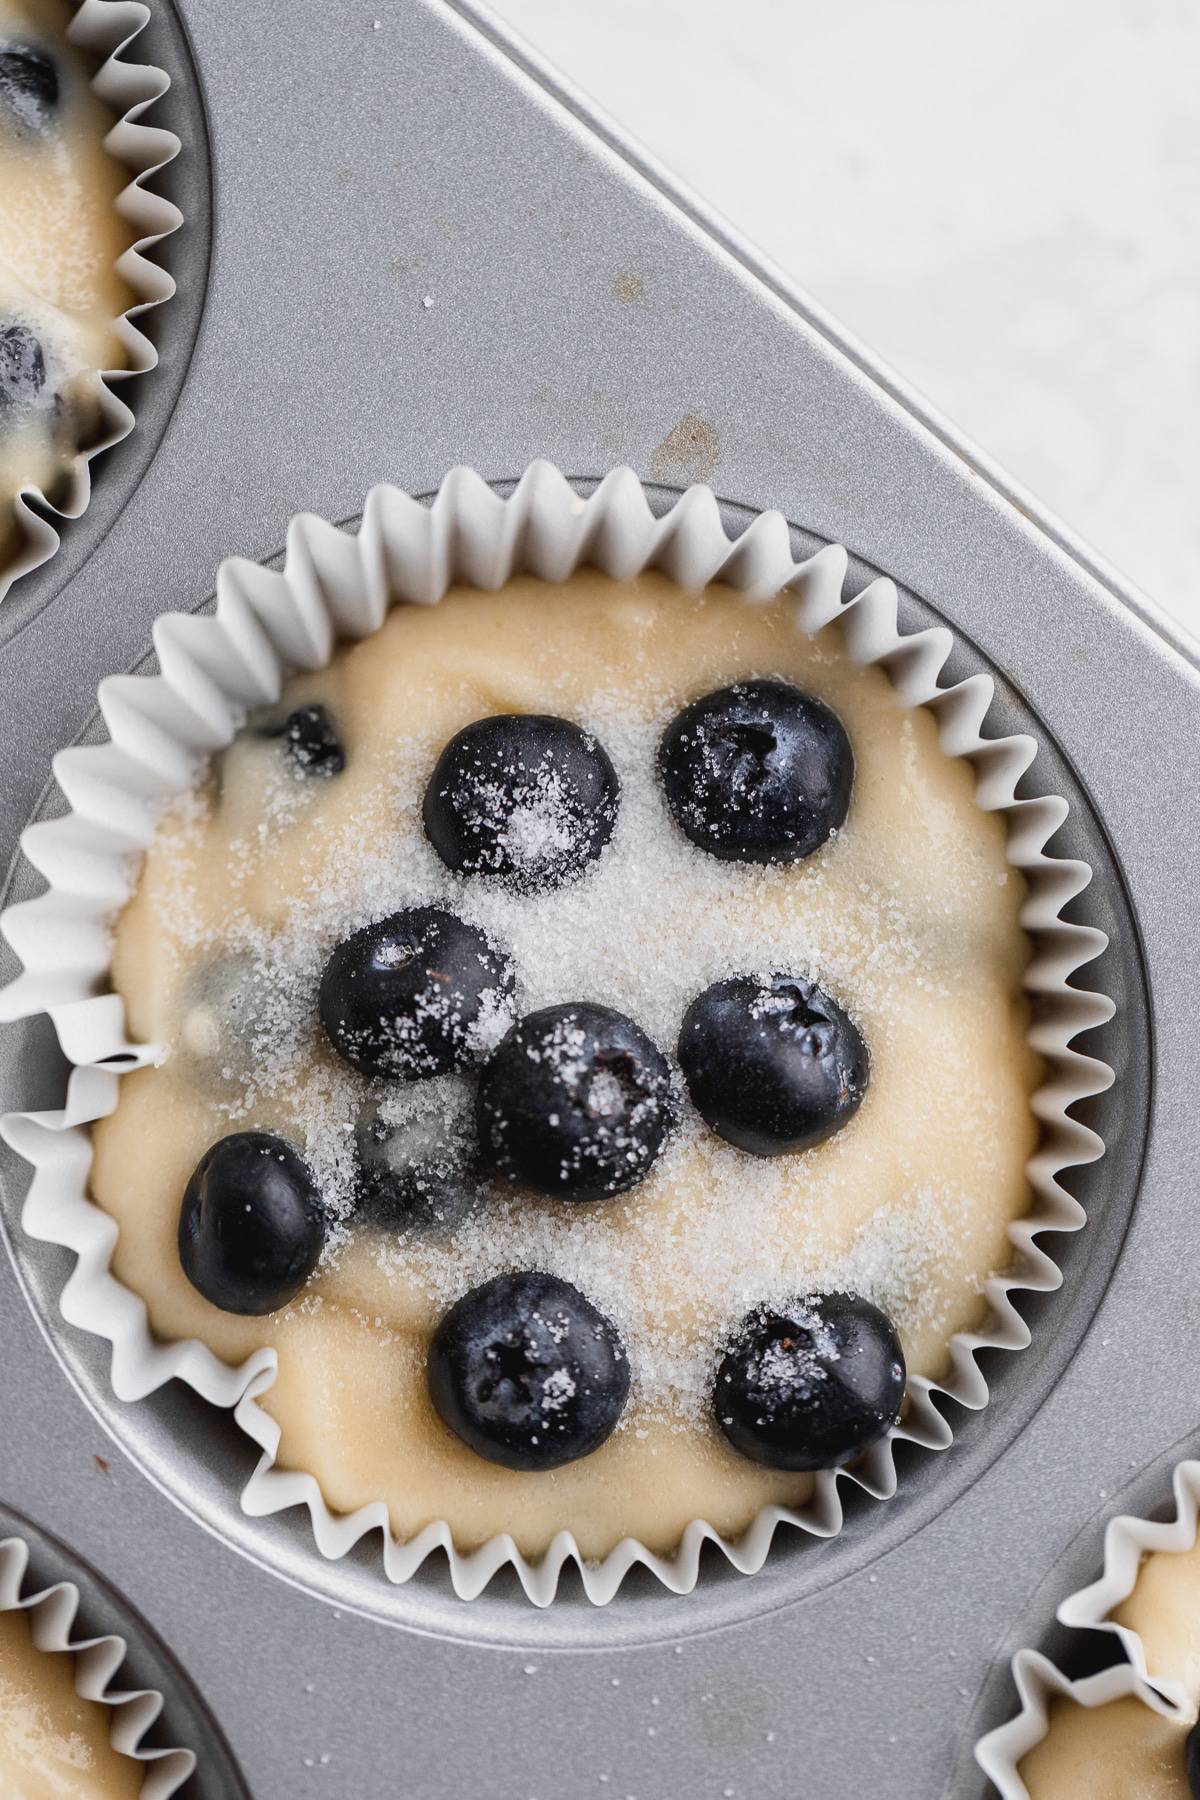 Batter in a muffin tin with sugar on top.